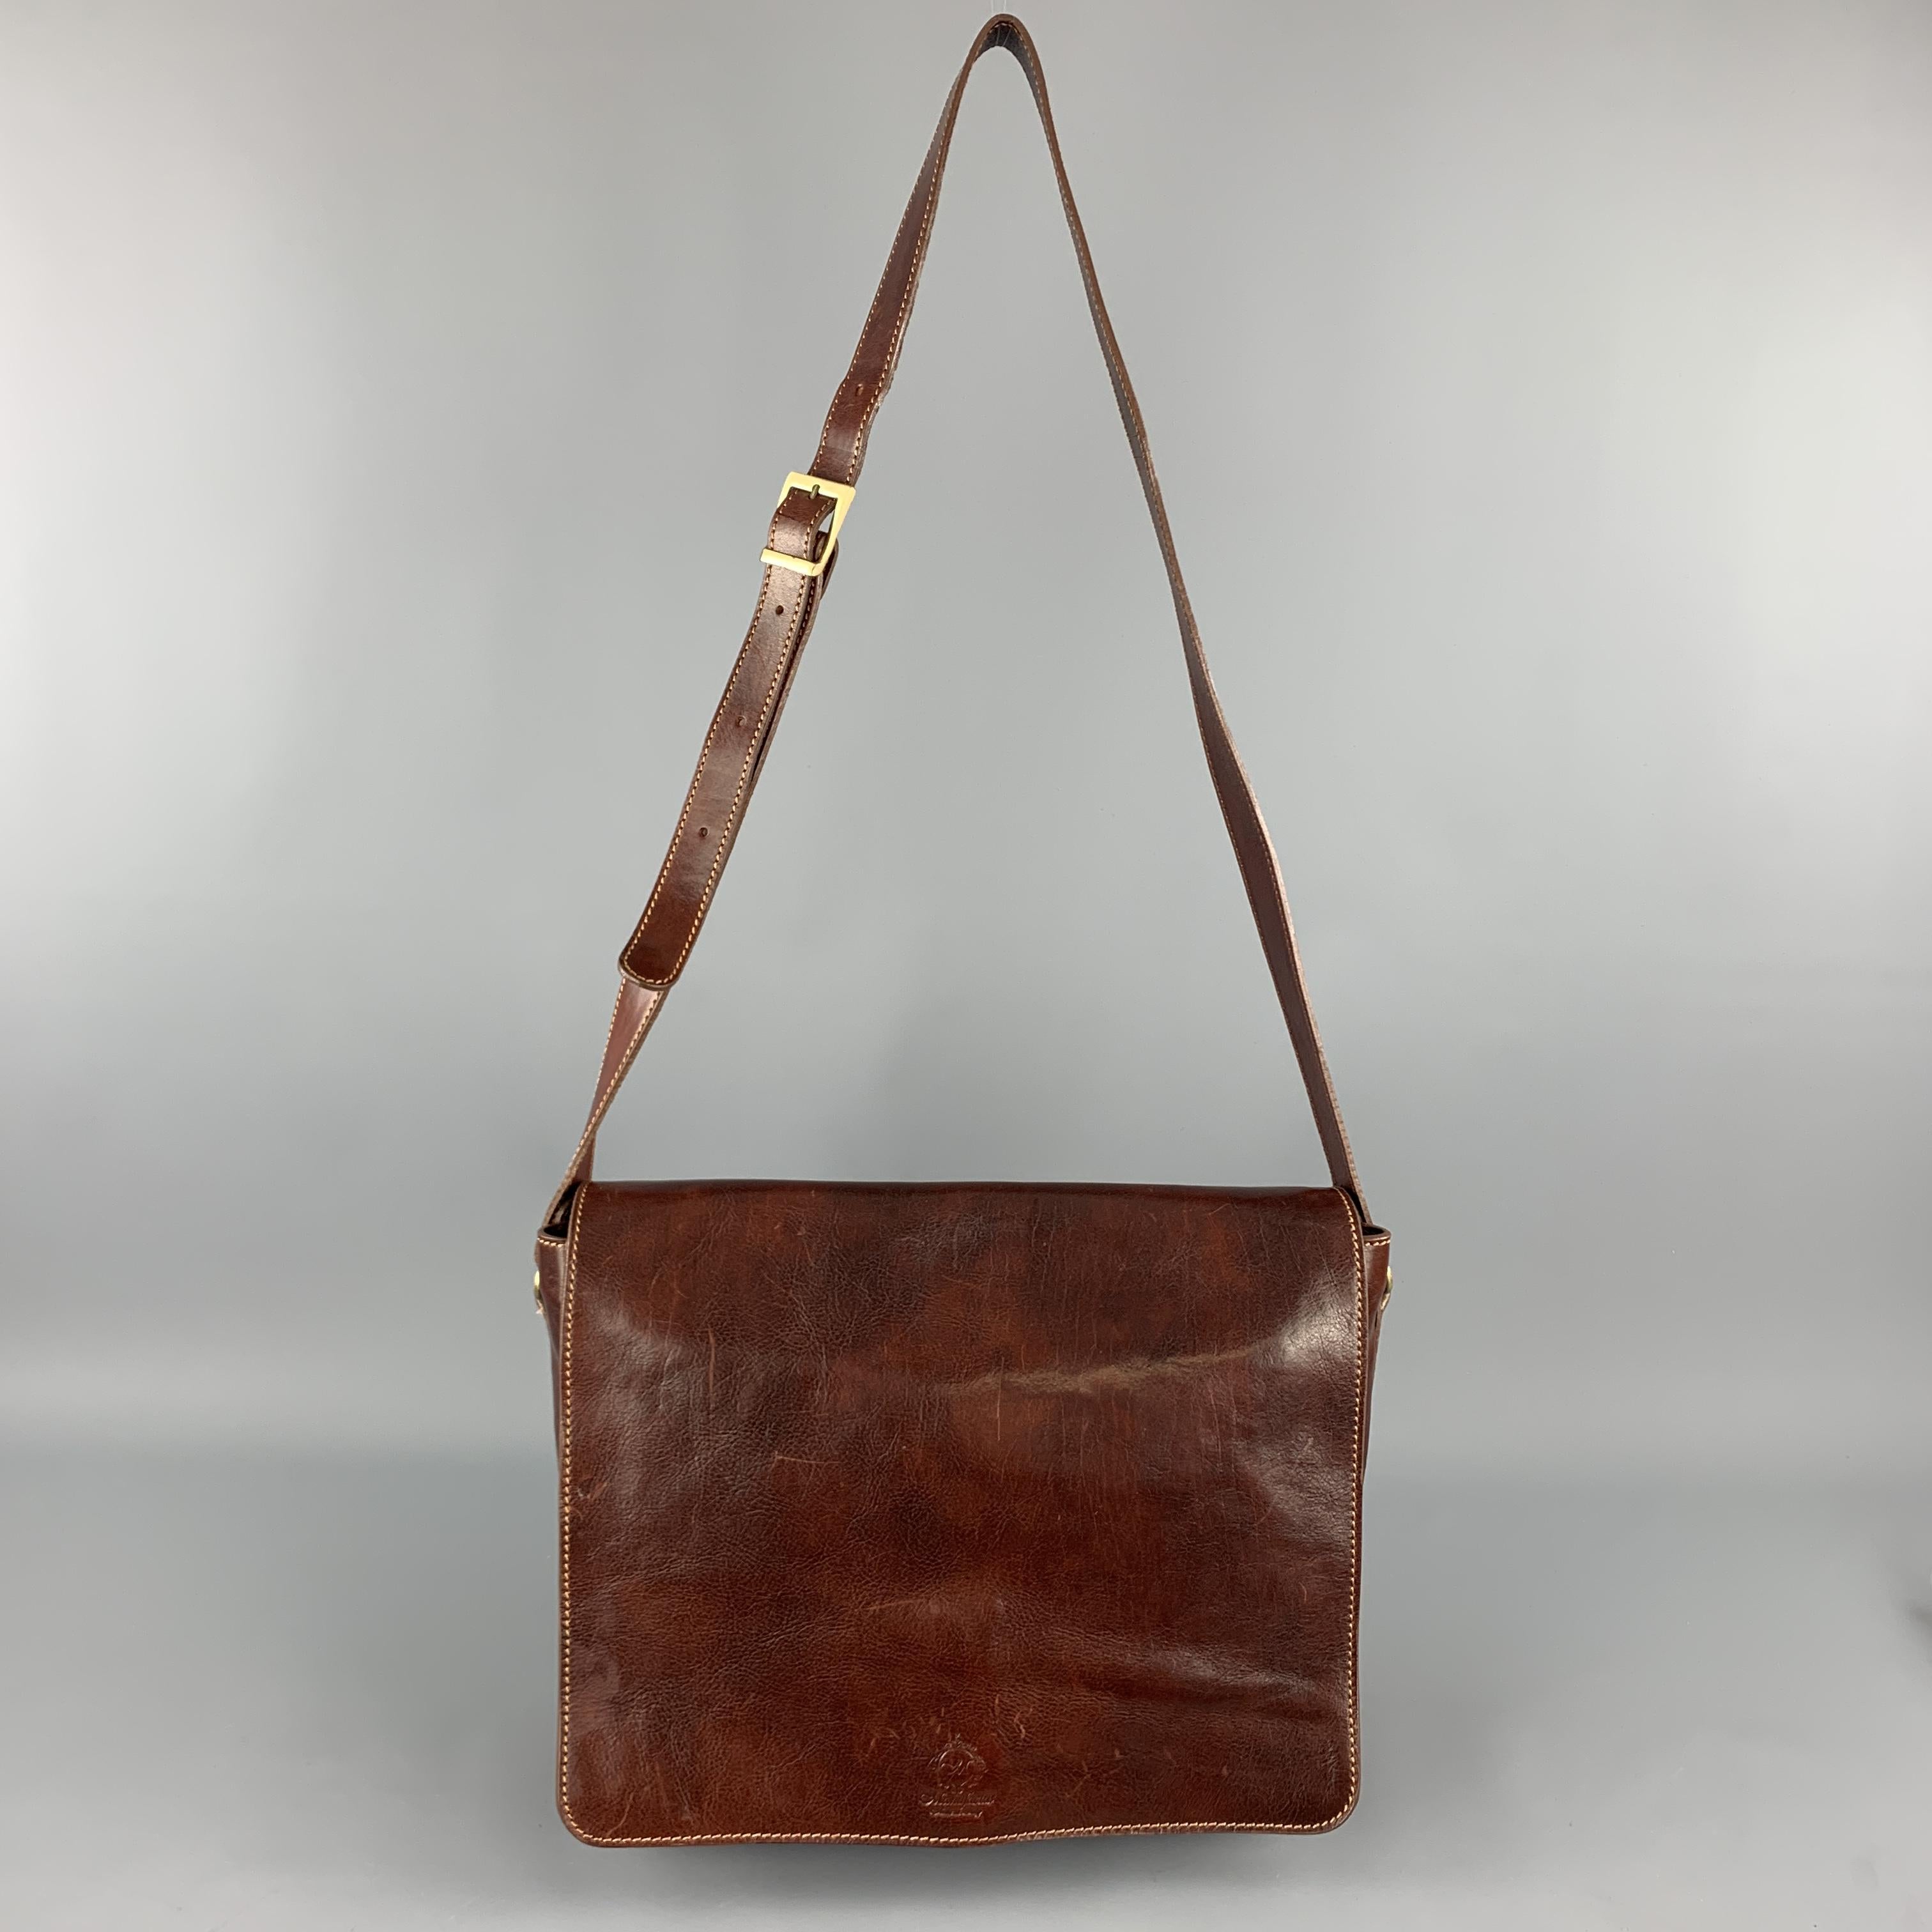 MANUFACTUS messenger bag comes in cognac leather with an embossed flap with inner press lock closure, adjustable strap, inner compartments with pockets. Made in Italy.

Very Good Pre-Owned Condition.

Measurements:

Length: 14.5 in.
Width: 4